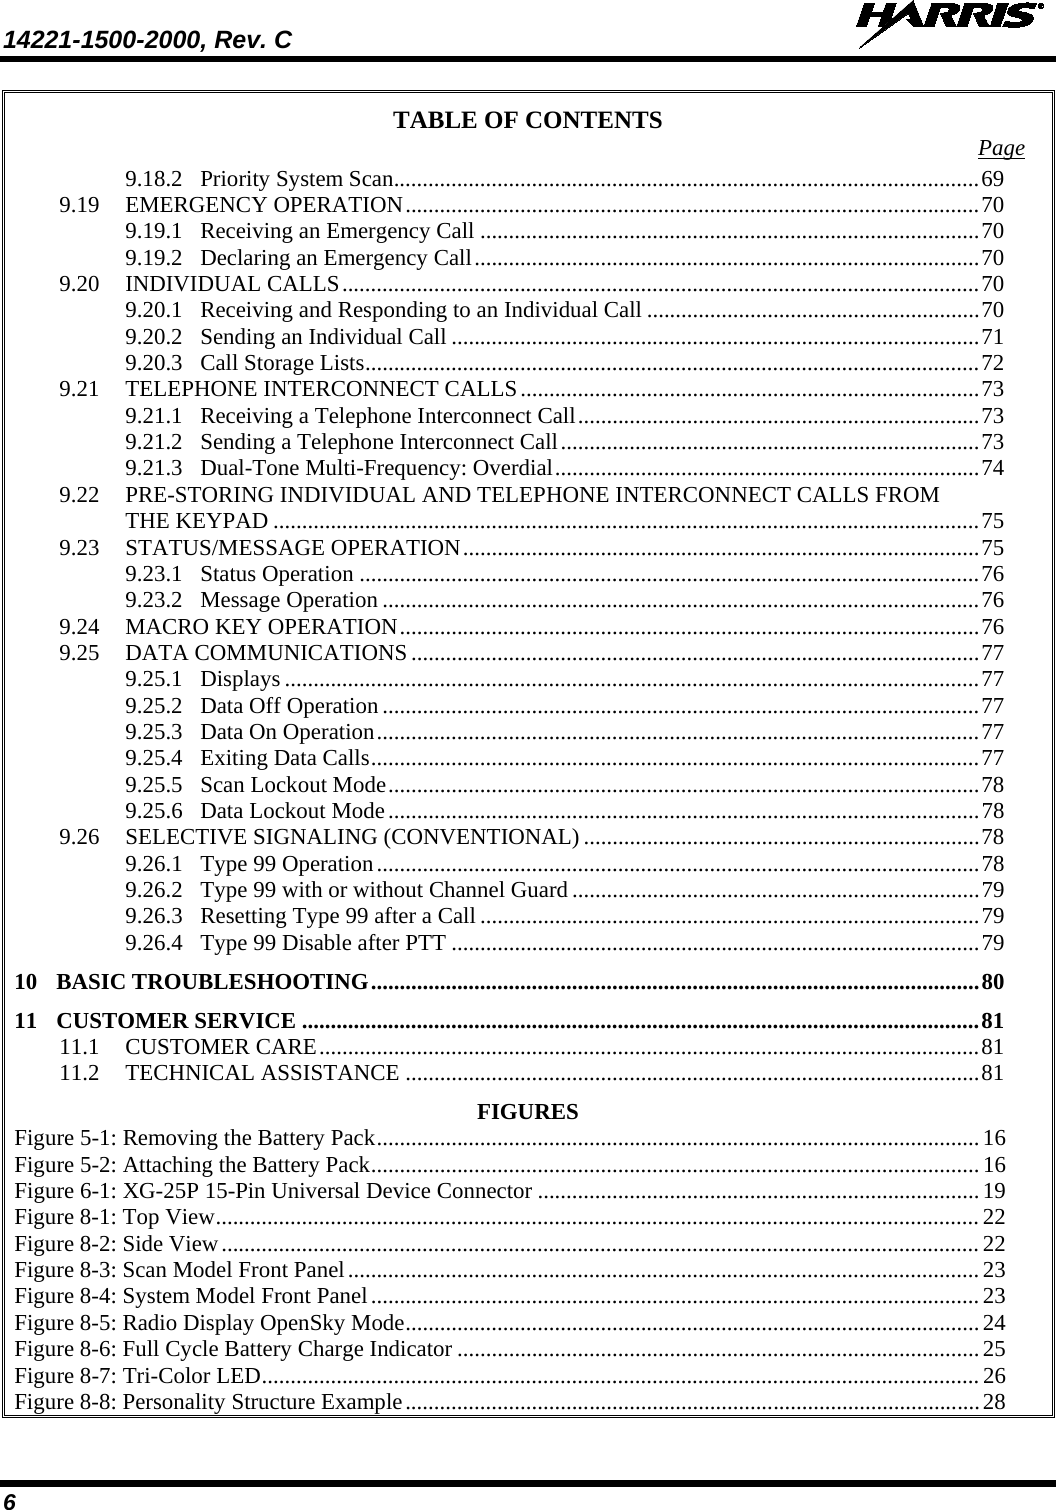 14221-1500-2000, Rev. C   6 TABLE OF CONTENTS Page 9.18.2 Priority System Scan...................................................................................................... 69 9.19 EMERGENCY OPERATION .................................................................................................... 70 9.19.1 Receiving an Emergency Call ....................................................................................... 70 9.19.2 Declaring an Emergency Call ........................................................................................ 70 9.20 INDIVIDUAL CALLS ............................................................................................................... 70 9.20.1 Receiving and Responding to an Individual Call .......................................................... 70 9.20.2 Sending an Individual Call ............................................................................................ 71 9.20.3 Call Storage Lists ........................................................................................................... 72 9.21 TELEPHONE INTERCONNECT CALLS ................................................................................ 73 9.21.1 Receiving a Telephone Interconnect Call ...................................................................... 73 9.21.2 Sending a Telephone Interconnect Call ......................................................................... 73 9.21.3 Dual-Tone Multi-Frequency: Overdial .......................................................................... 74 9.22 PRE-STORING INDIVIDUAL AND TELEPHONE INTERCONNECT CALLS FROM THE KEYPAD ........................................................................................................................... 75 9.23 STATUS/MESSAGE OPERATION .......................................................................................... 75 9.23.1 Status Operation ............................................................................................................ 76 9.23.2 Message Operation ........................................................................................................ 76 9.24 MACRO KEY OPERATION ..................................................................................................... 76 9.25 DATA COMMUNICATIONS ................................................................................................... 77 9.25.1 Displays ......................................................................................................................... 77 9.25.2 Data Off Operation ........................................................................................................ 77 9.25.3 Data On Operation ......................................................................................................... 77 9.25.4 Exiting Data Calls .......................................................................................................... 77 9.25.5 Scan Lockout Mode ....................................................................................................... 78 9.25.6 Data Lockout Mode ....................................................................................................... 78 9.26 SELECTIVE SIGNALING (CONVENTIONAL) ..................................................................... 78 9.26.1 Type 99 Operation ......................................................................................................... 78 9.26.2 Type 99 with or without Channel Guard ....................................................................... 79 9.26.3 Resetting Type 99 after a Call ....................................................................................... 79 9.26.4 Type 99 Disable after PTT ............................................................................................ 79 10 BASIC TROUBLESHOOTING .......................................................................................................... 80 11 CUSTOMER SERVICE ...................................................................................................................... 81 11.1 CUSTOMER CARE ................................................................................................................... 81 11.2 TECHNICAL ASSISTANCE .................................................................................................... 81 FIGURES Figure 5-1: Removing the Battery Pack ......................................................................................................... 16 Figure 5-2: Attaching the Battery Pack .......................................................................................................... 16 Figure 6-1: XG-25P 15-Pin Universal Device Connector ............................................................................. 19 Figure 8-1: Top View ..................................................................................................................................... 22 Figure 8-2: Side View .................................................................................................................................... 22 Figure 8-3: Scan Model Front Panel .............................................................................................................. 23 Figure 8-4: System Model Front Panel .......................................................................................................... 23 Figure 8-5: Radio Display OpenSky Mode .................................................................................................... 24 Figure 8-6: Full Cycle Battery Charge Indicator ........................................................................................... 25 Figure 8-7: Tri-Color LED ............................................................................................................................. 26 Figure 8-8: Personality Structure Example .................................................................................................... 28 